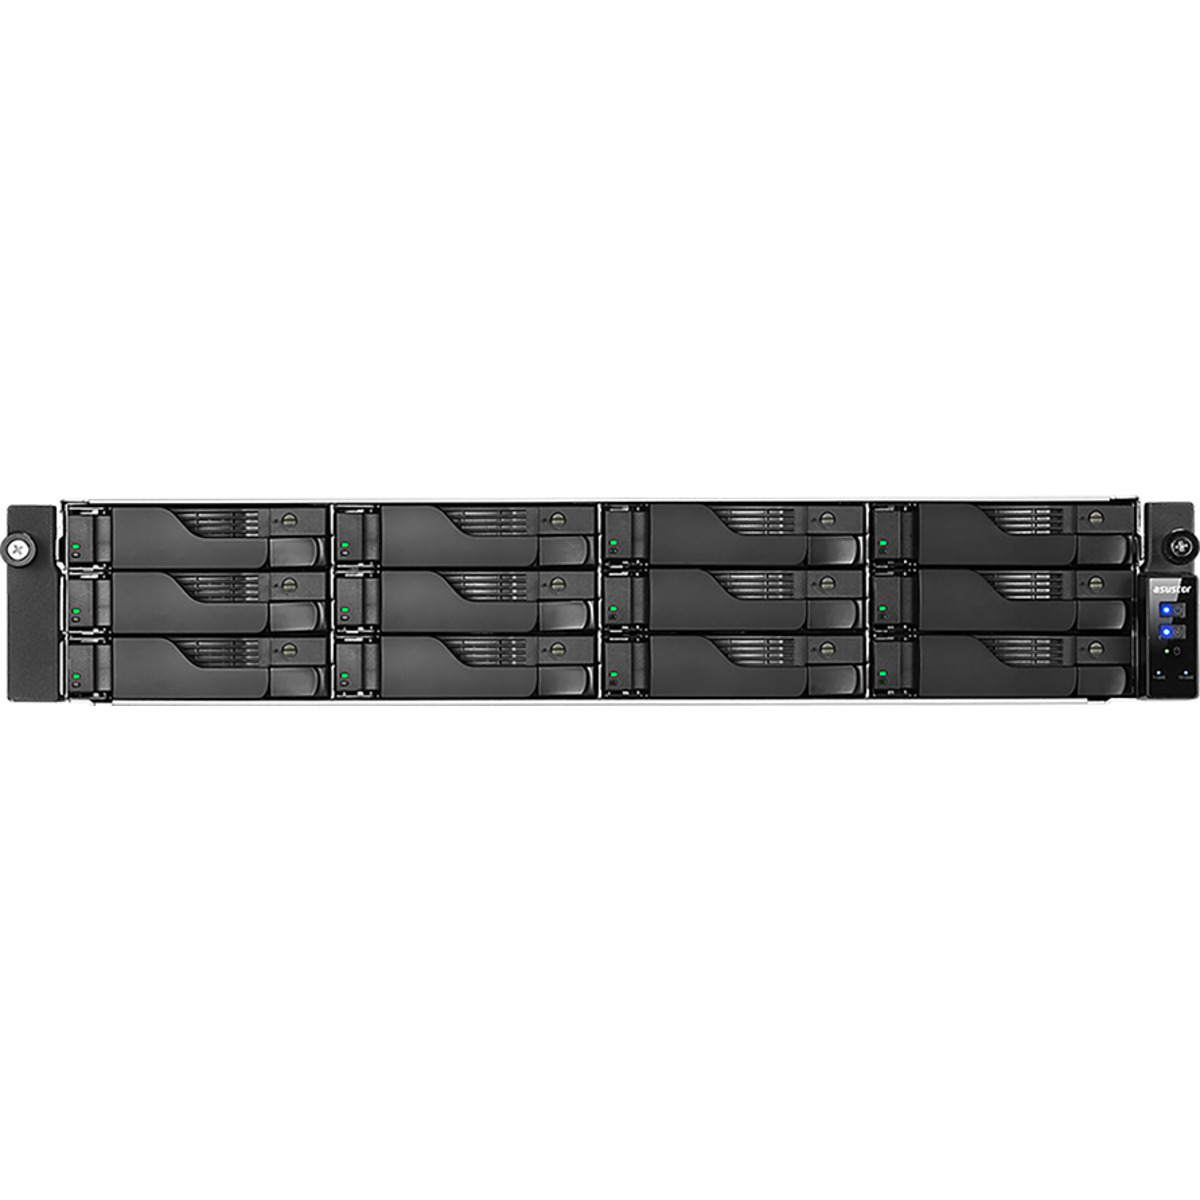 ASUSTOR LOCKERSTOR 12RD AS6512RD 180tb 12-Bay RackMount Multimedia / Power User / Business NAS - Network Attached Storage Device 10x18tb Western Digital Red Pro WD181KFGX 3.5 7200rpm SATA 6Gb/s HDD NAS Class Drives Installed - Burn-In Tested - FREE RAM UPGRADE LOCKERSTOR 12RD AS6512RD